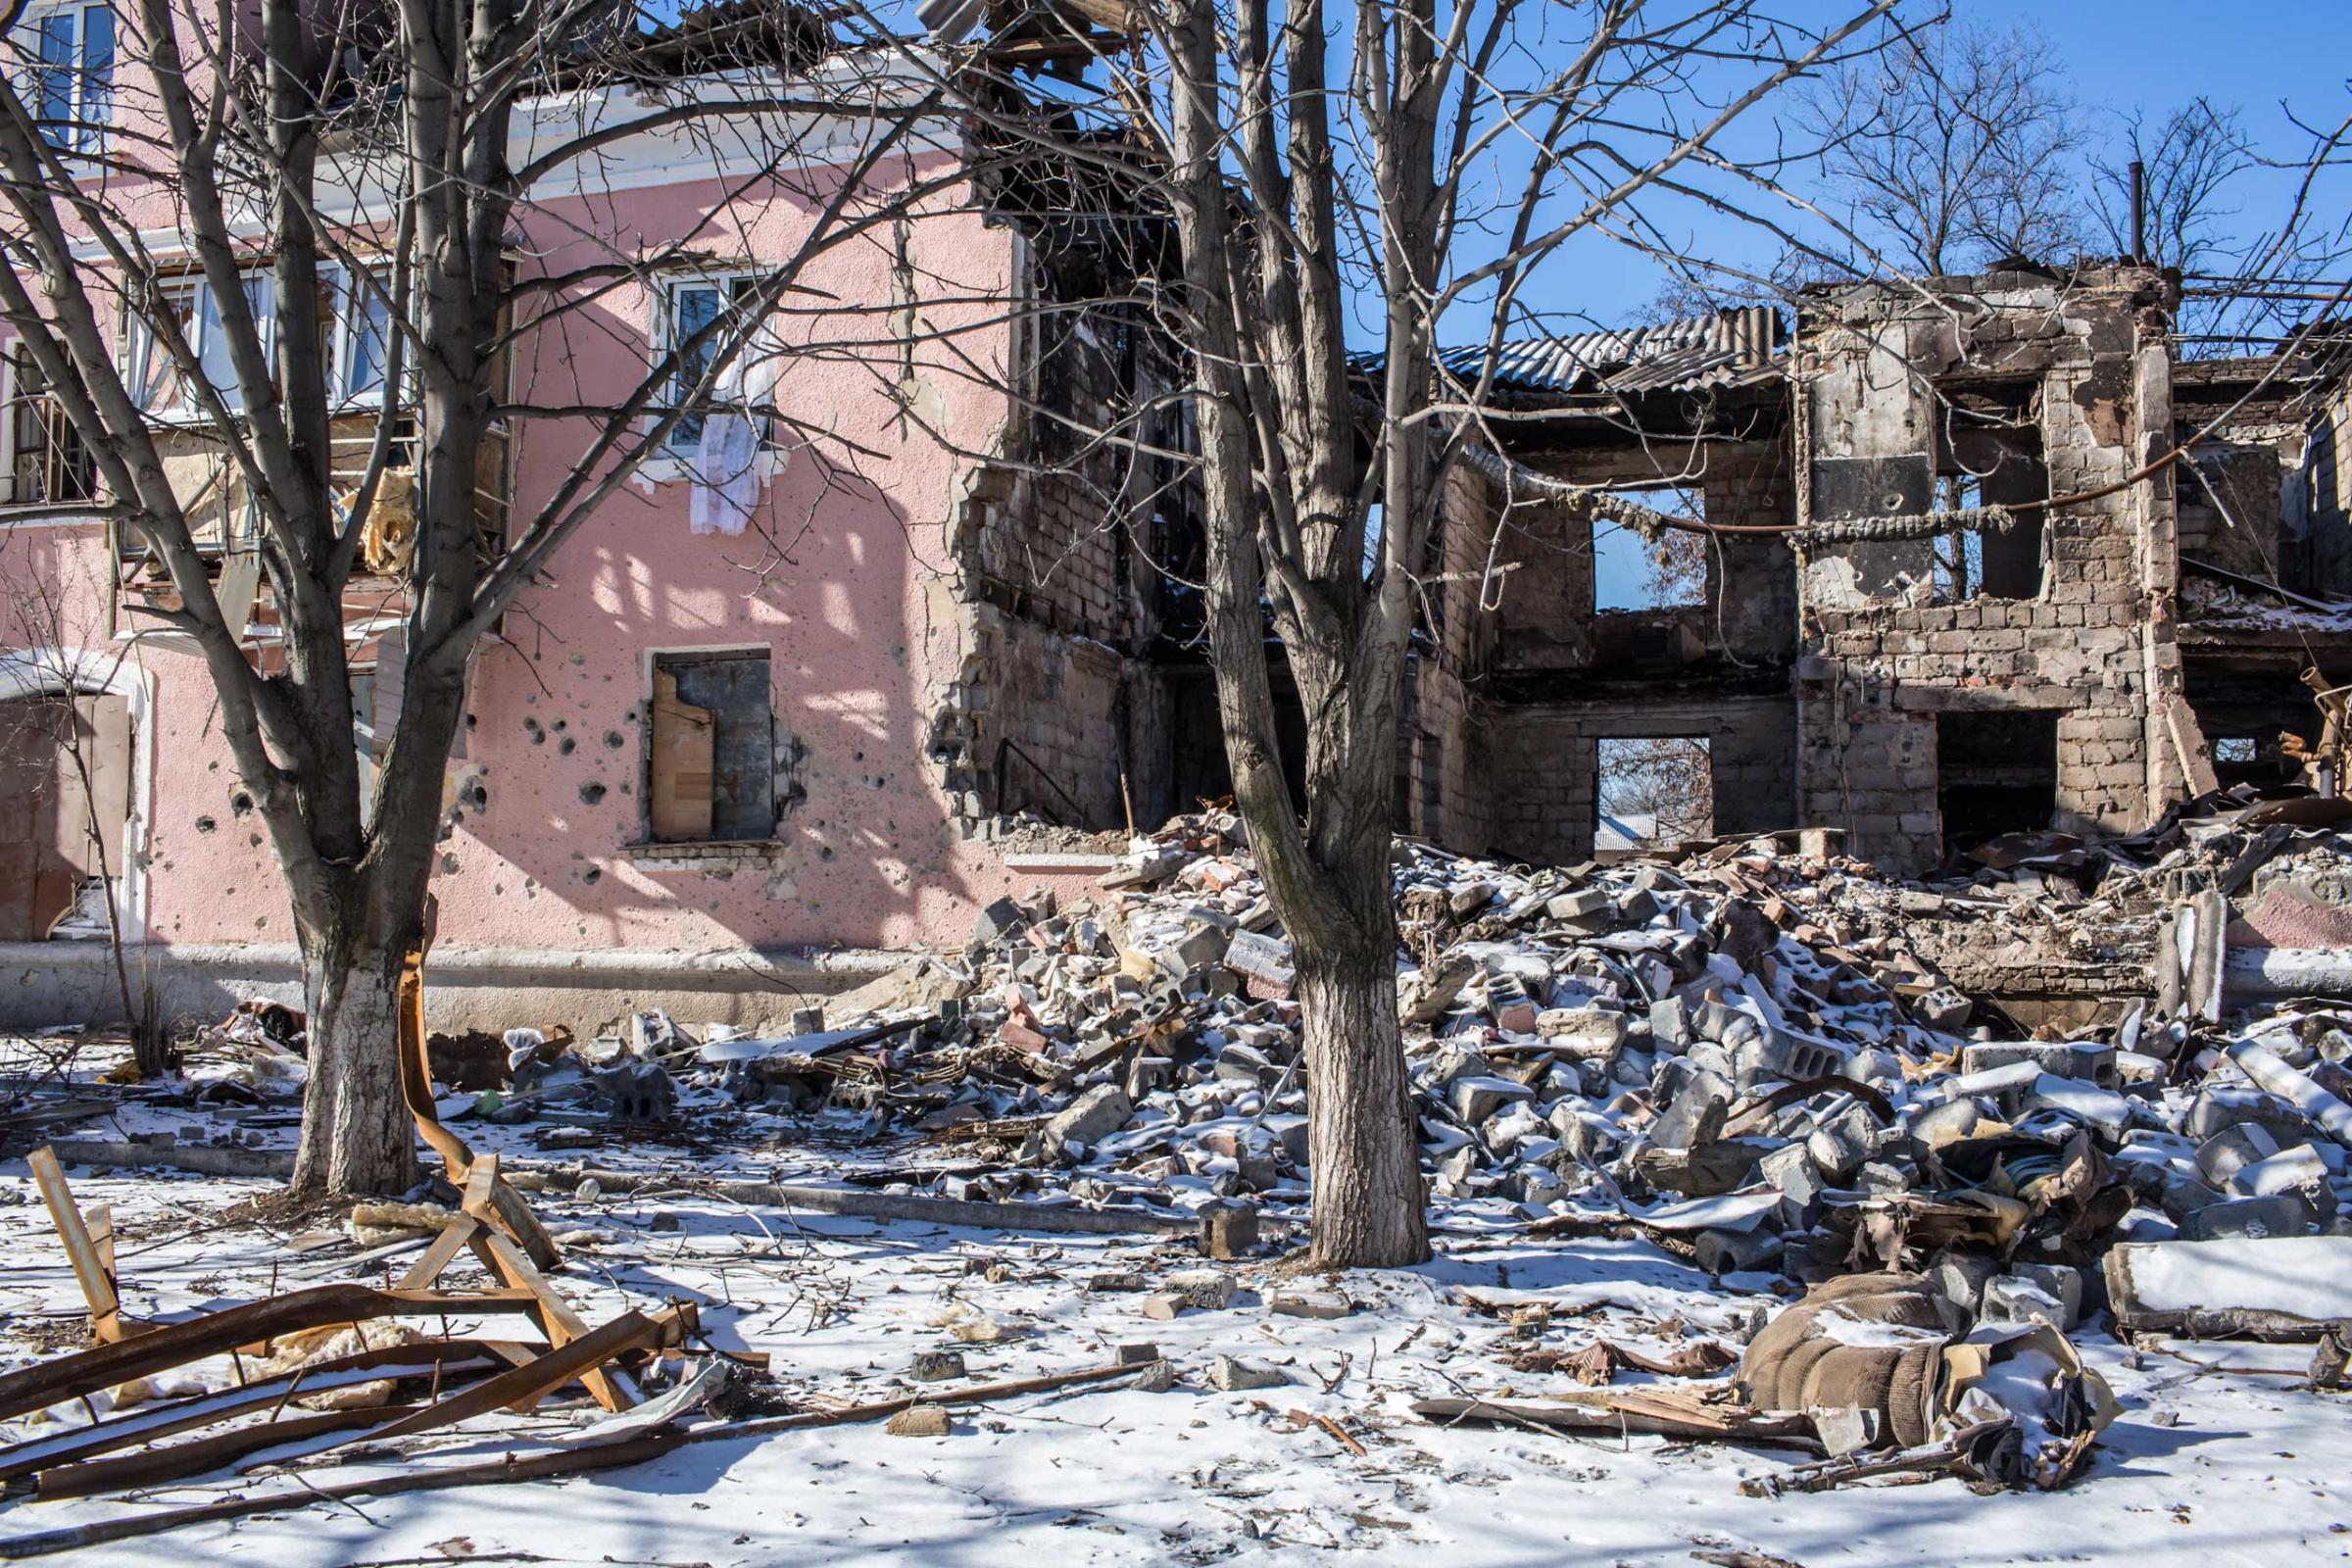 A building lies in ruins from being hit by a shell on Feb. 17, 2015 in Mironovka, near Debaltseve.